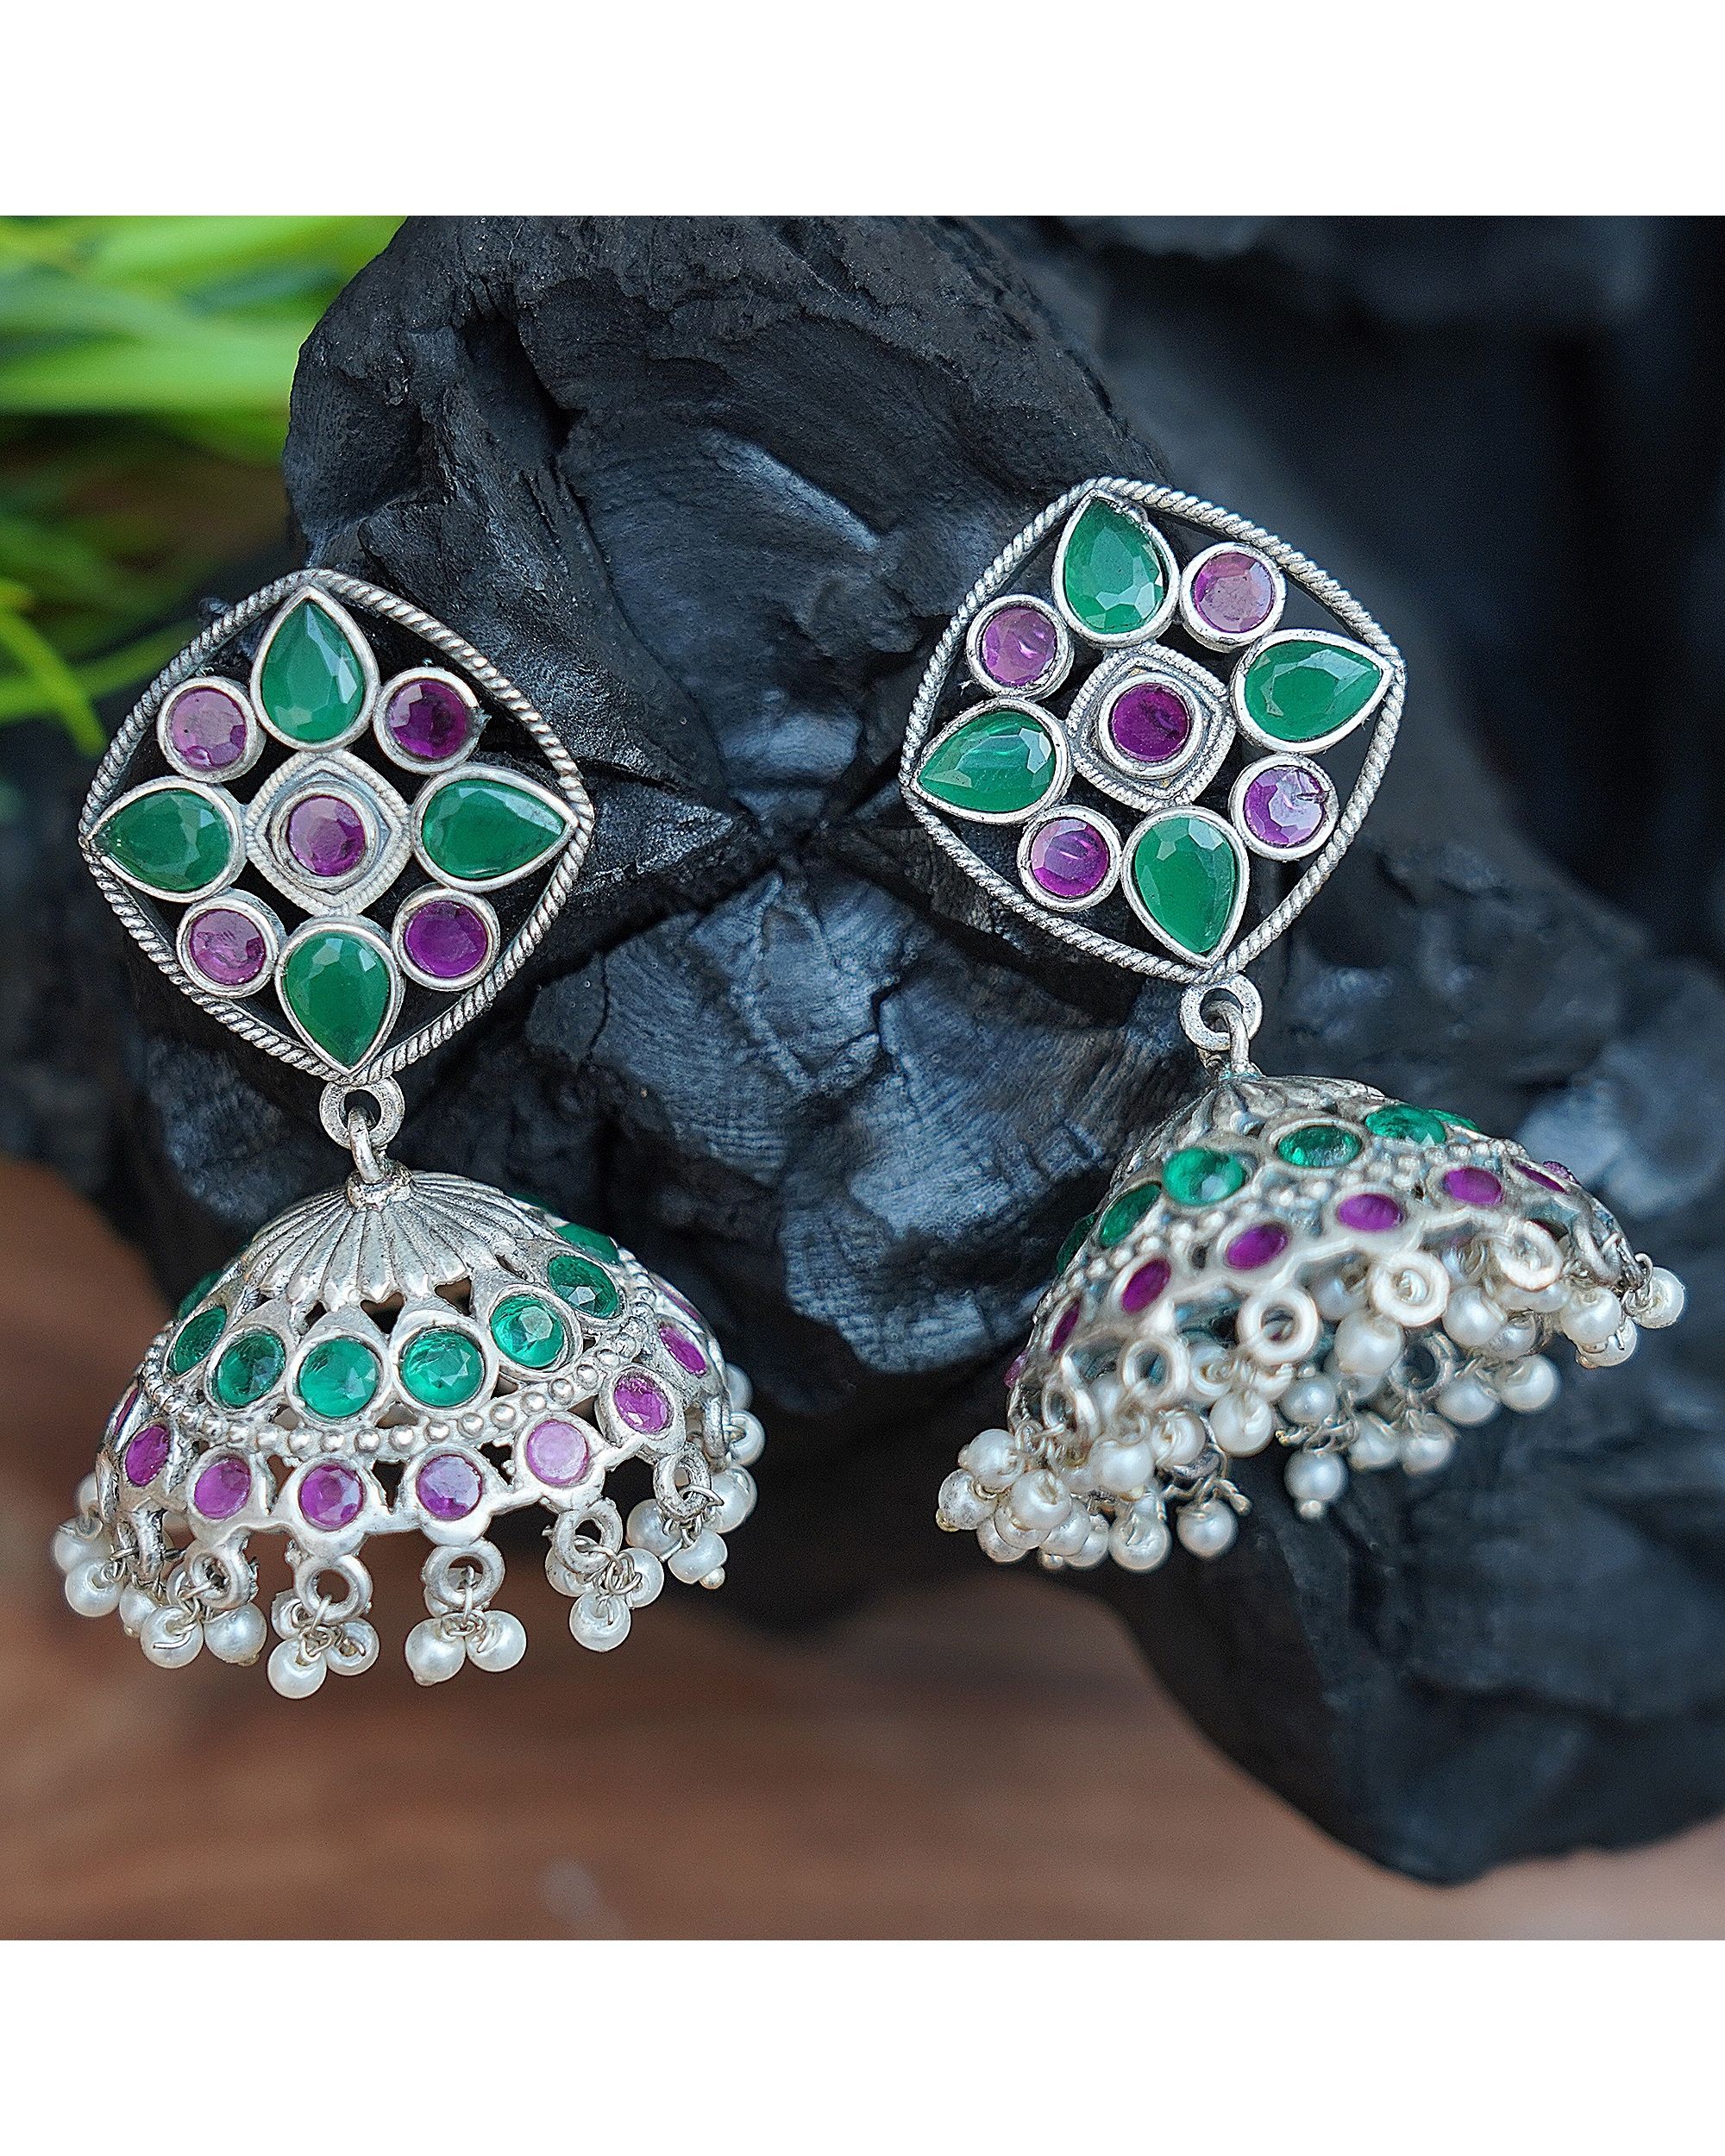 Green and purple stone embellished earrings